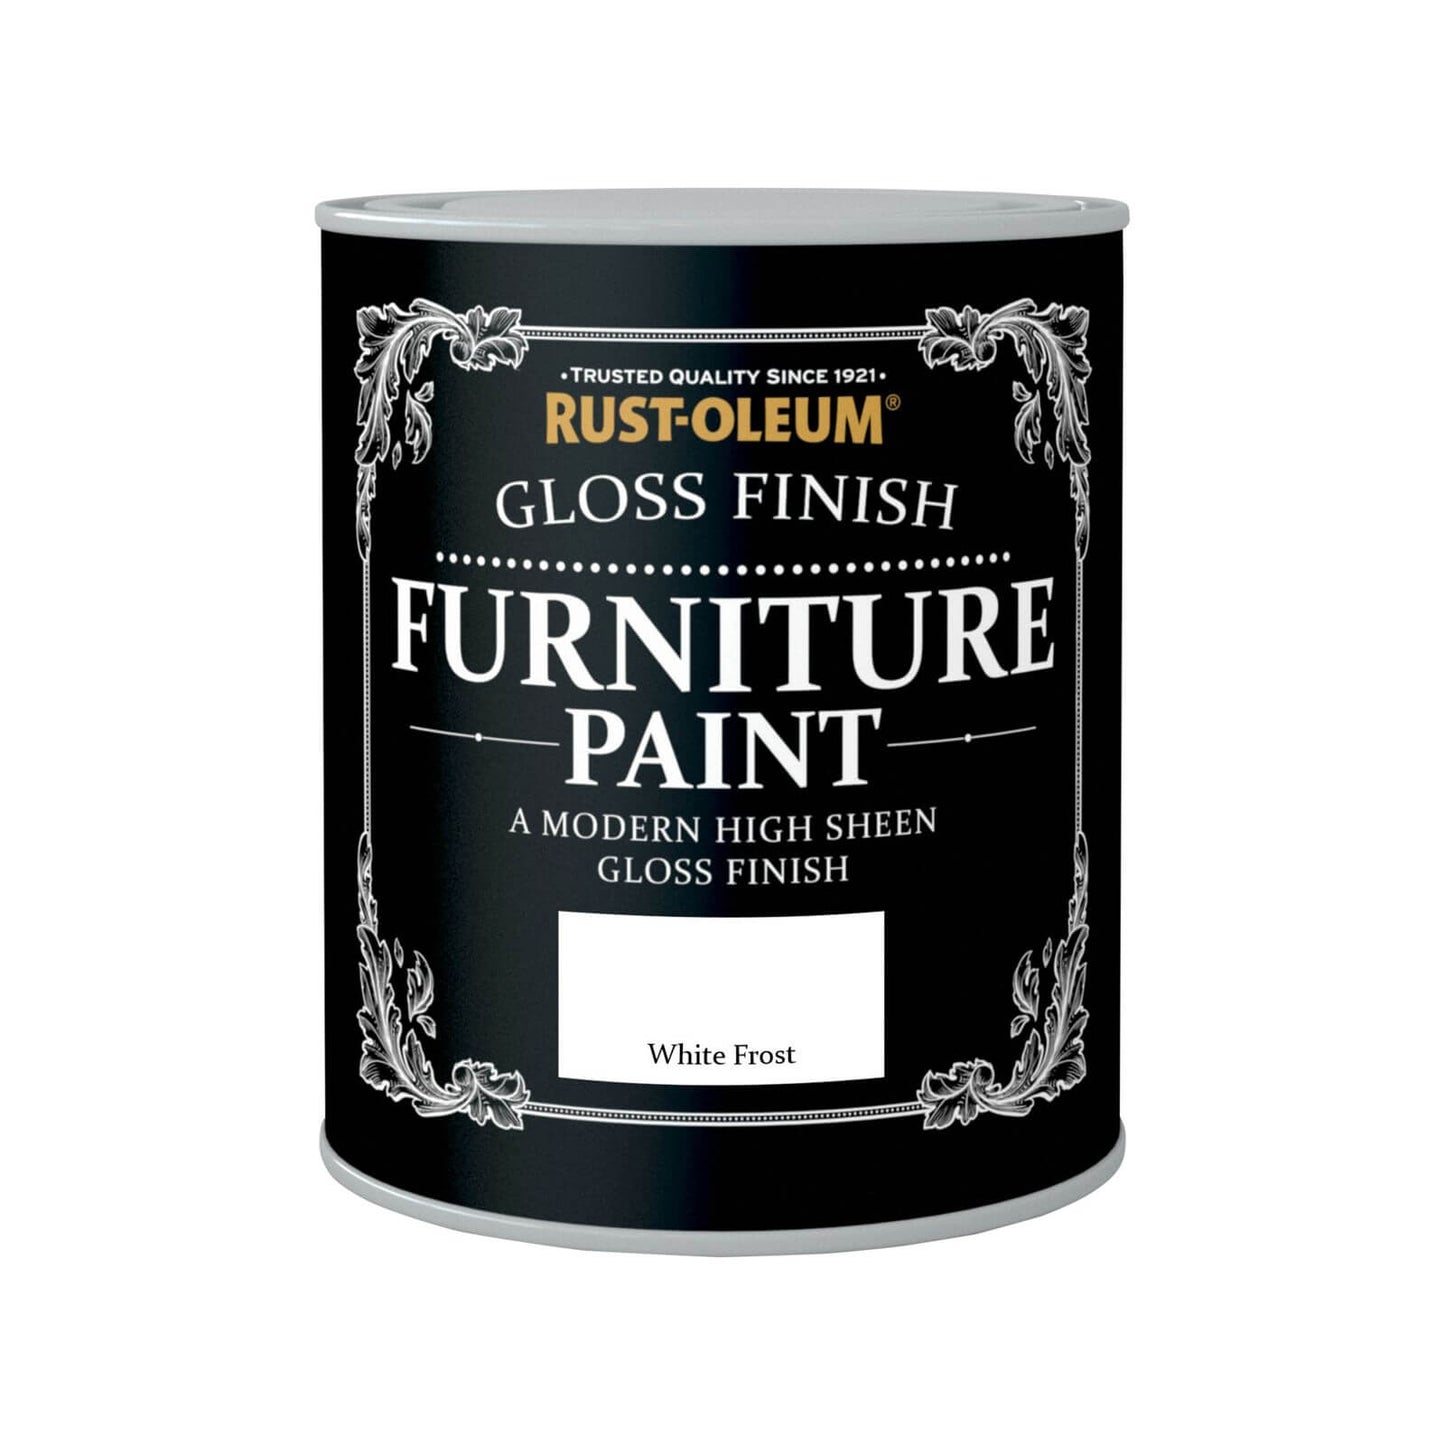 Rust-Oleum Gloss Finish Furniture Paint White Frost